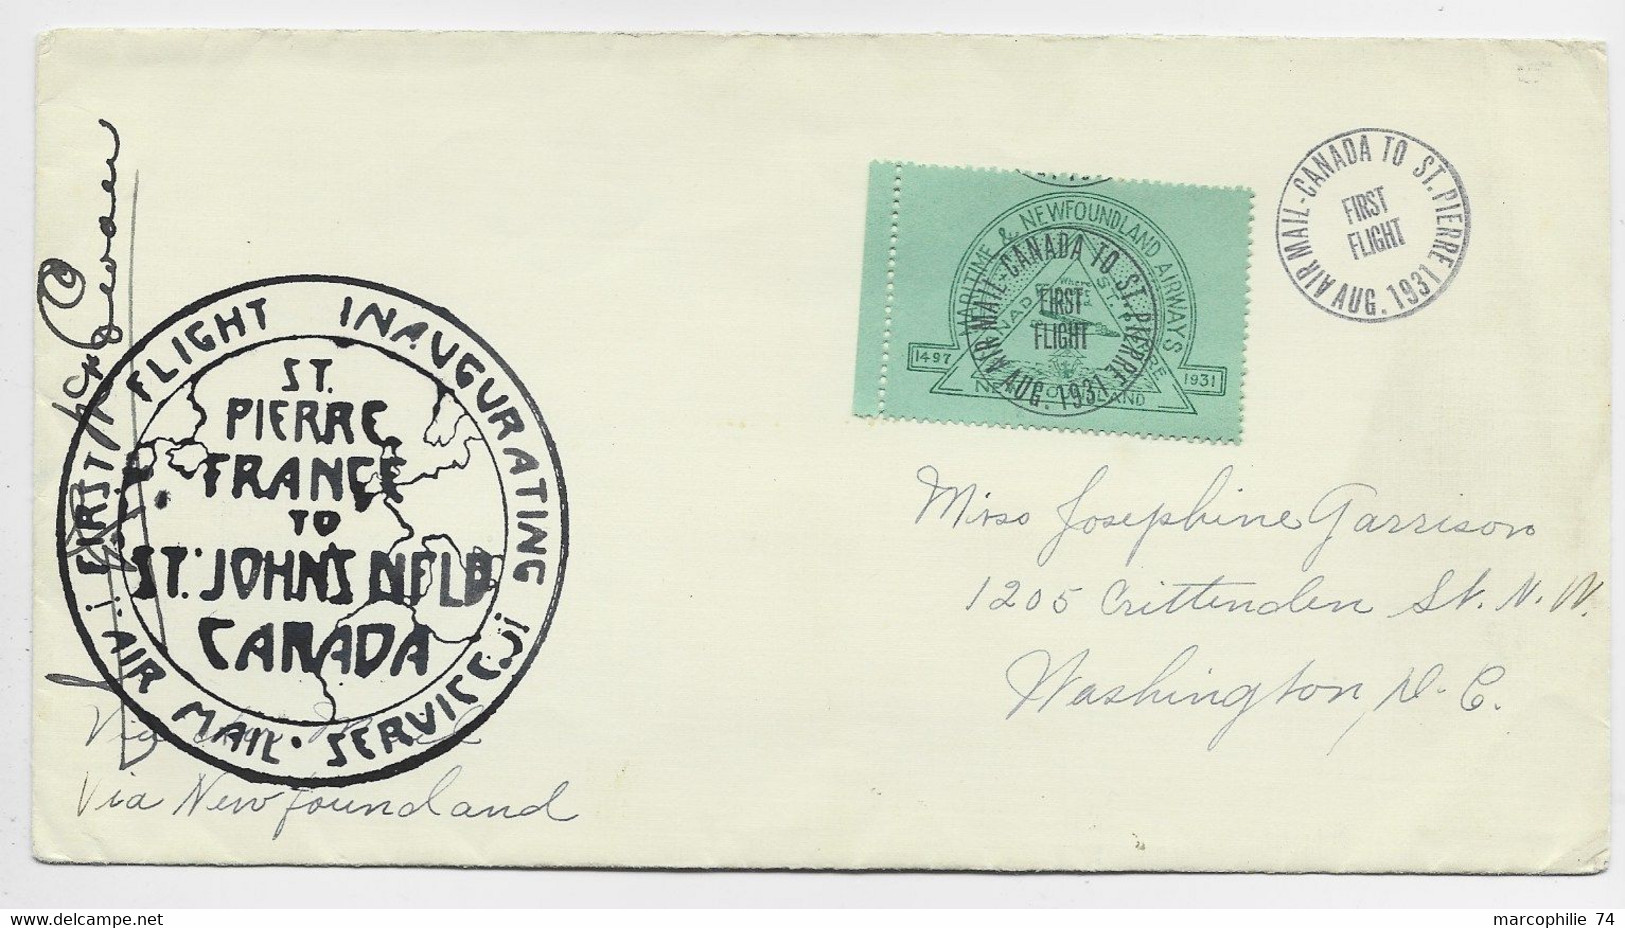 CANADA NEW FOUNLAND AIR WAYS ST PIERRE CANADA FIRST FLIGHT 1931 LETTRE COVER INAUGURATING TO USA + SIGNATURE PILOTE - Premiers Vols